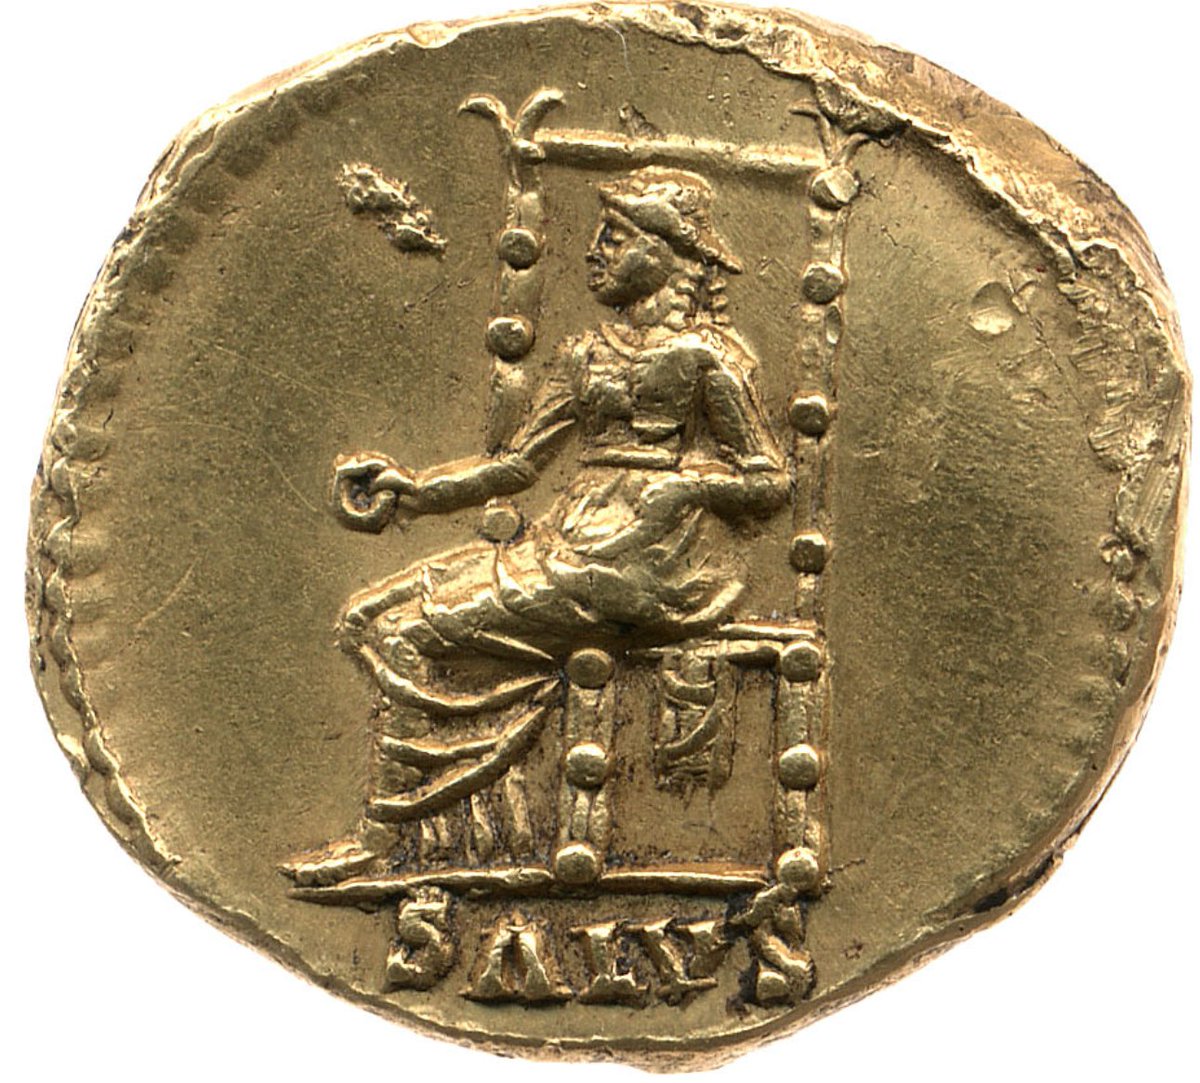 There is something of an irony in that the Reverse of this final coin shows an enthroned 'Salus' - the personification of Health and Welfare.